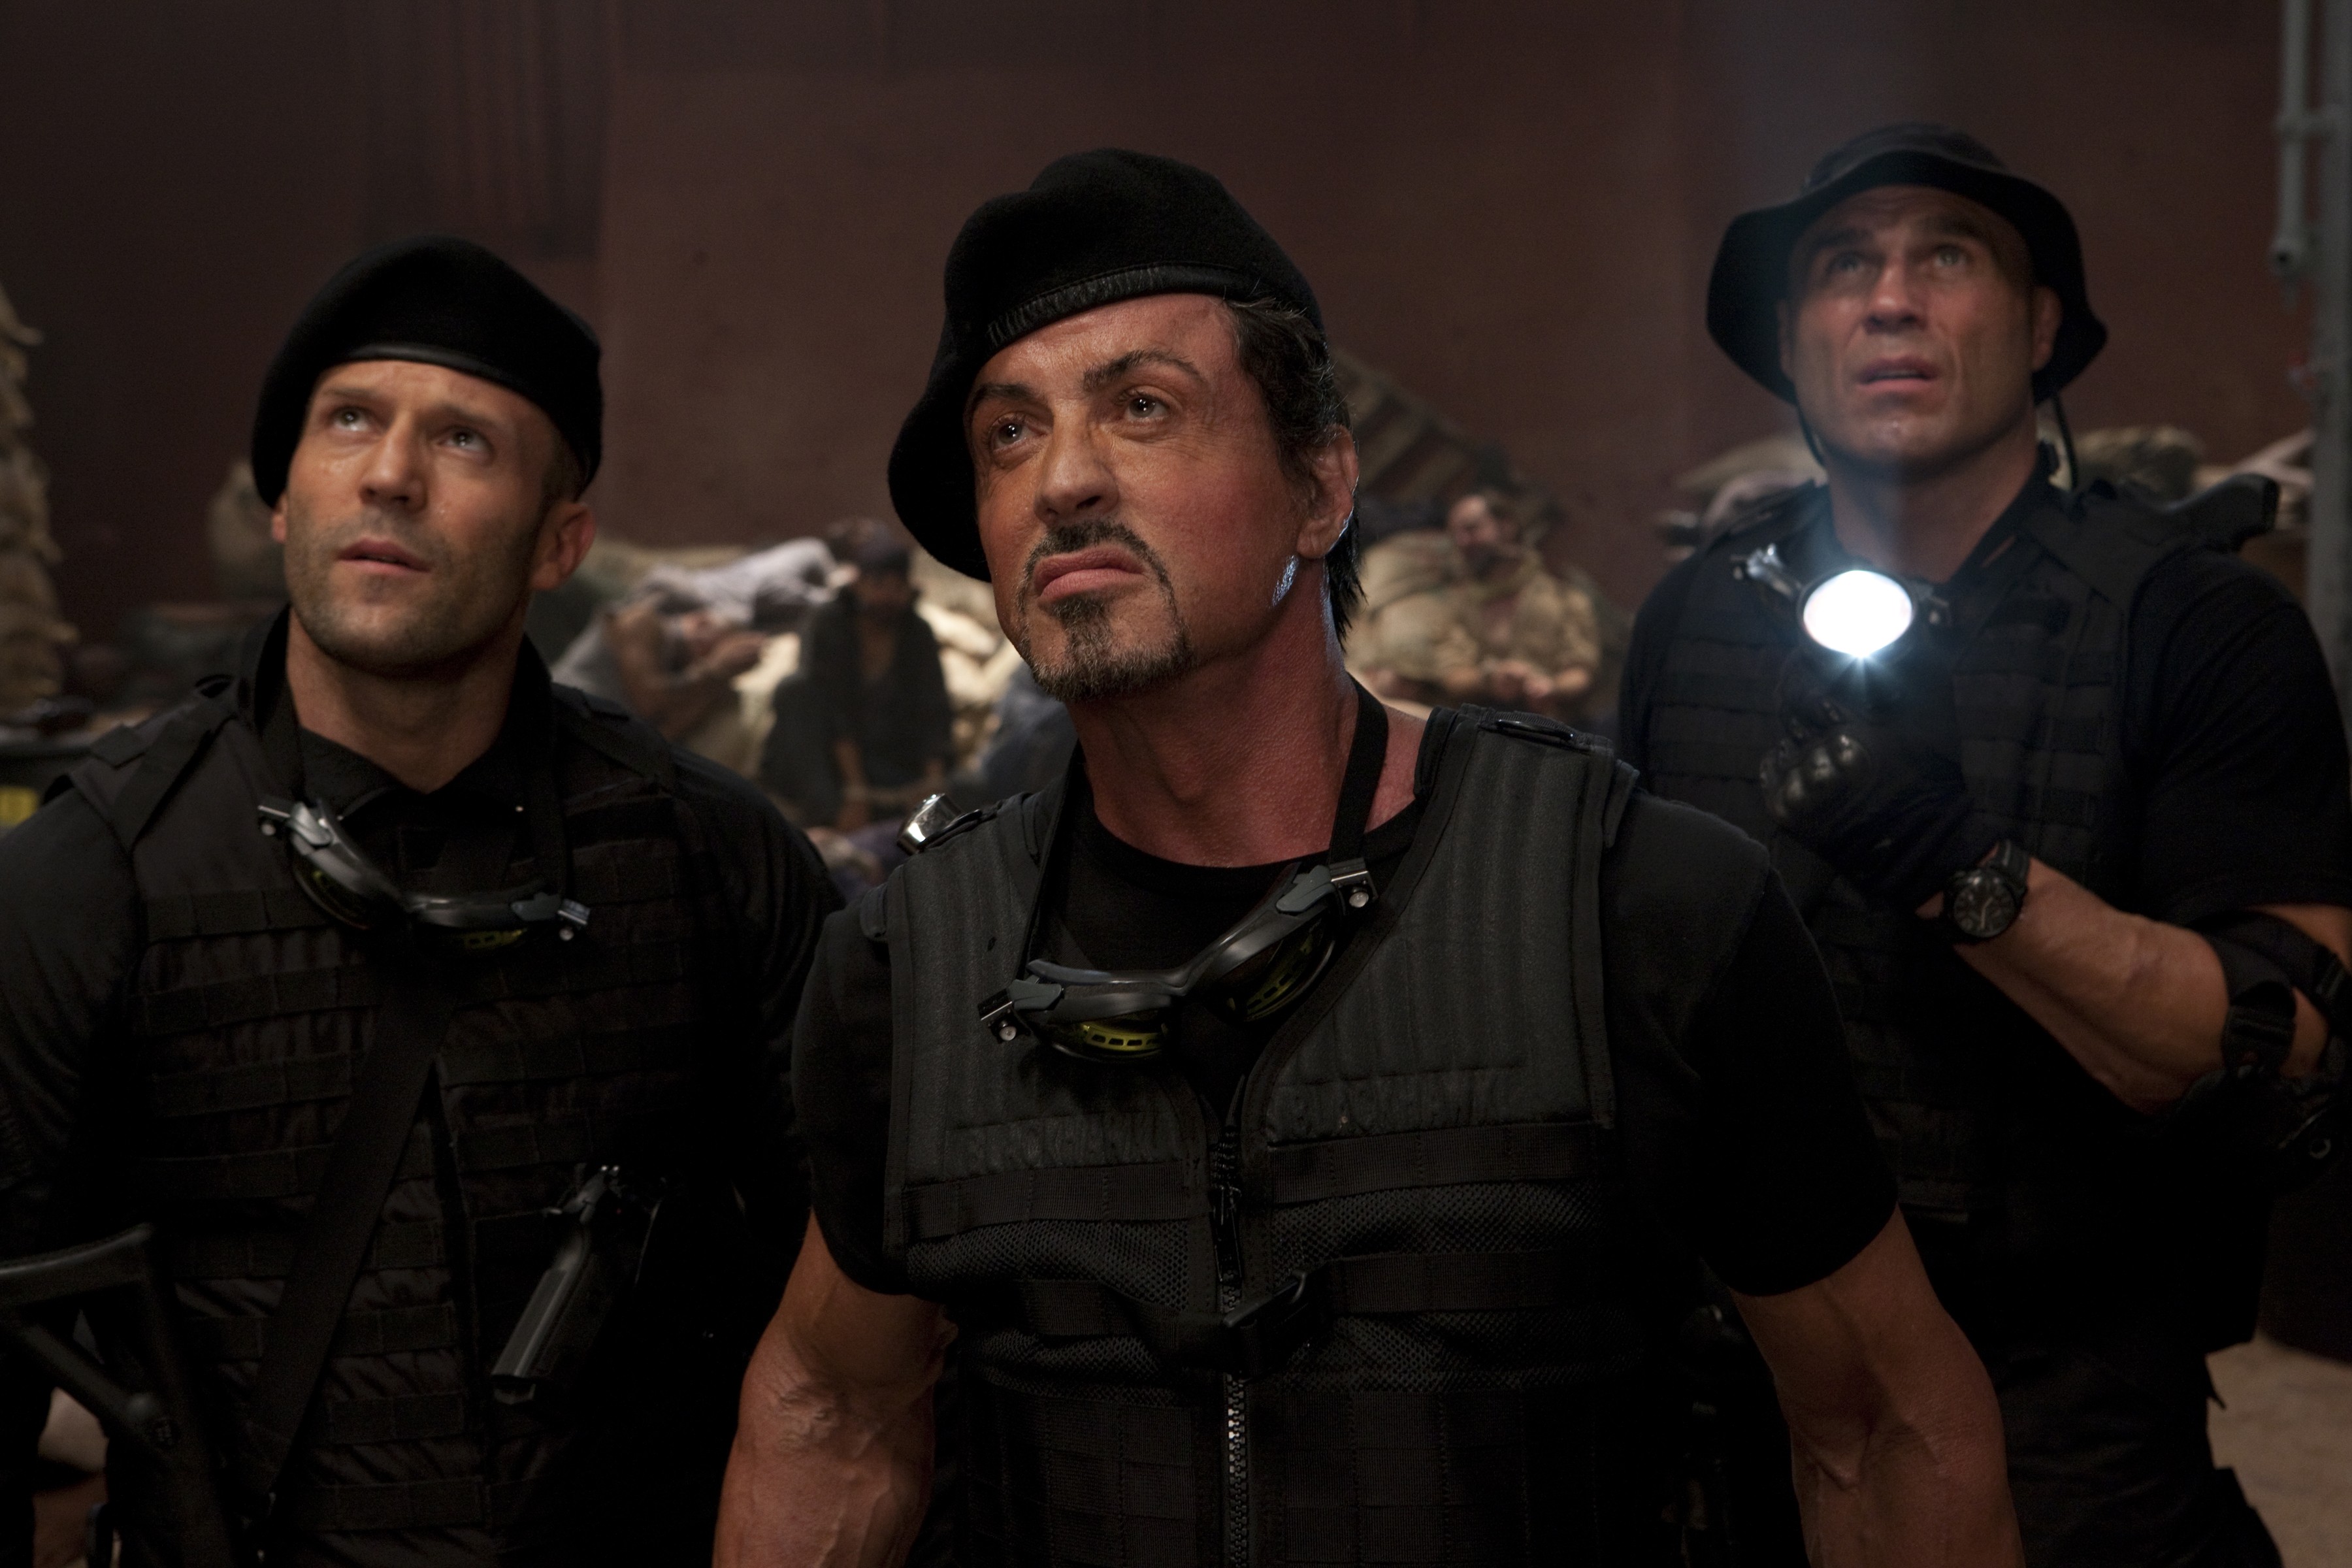 UFC, Randy Couture, The Expendables, Dolph Lundgren, Sylvester Stallone